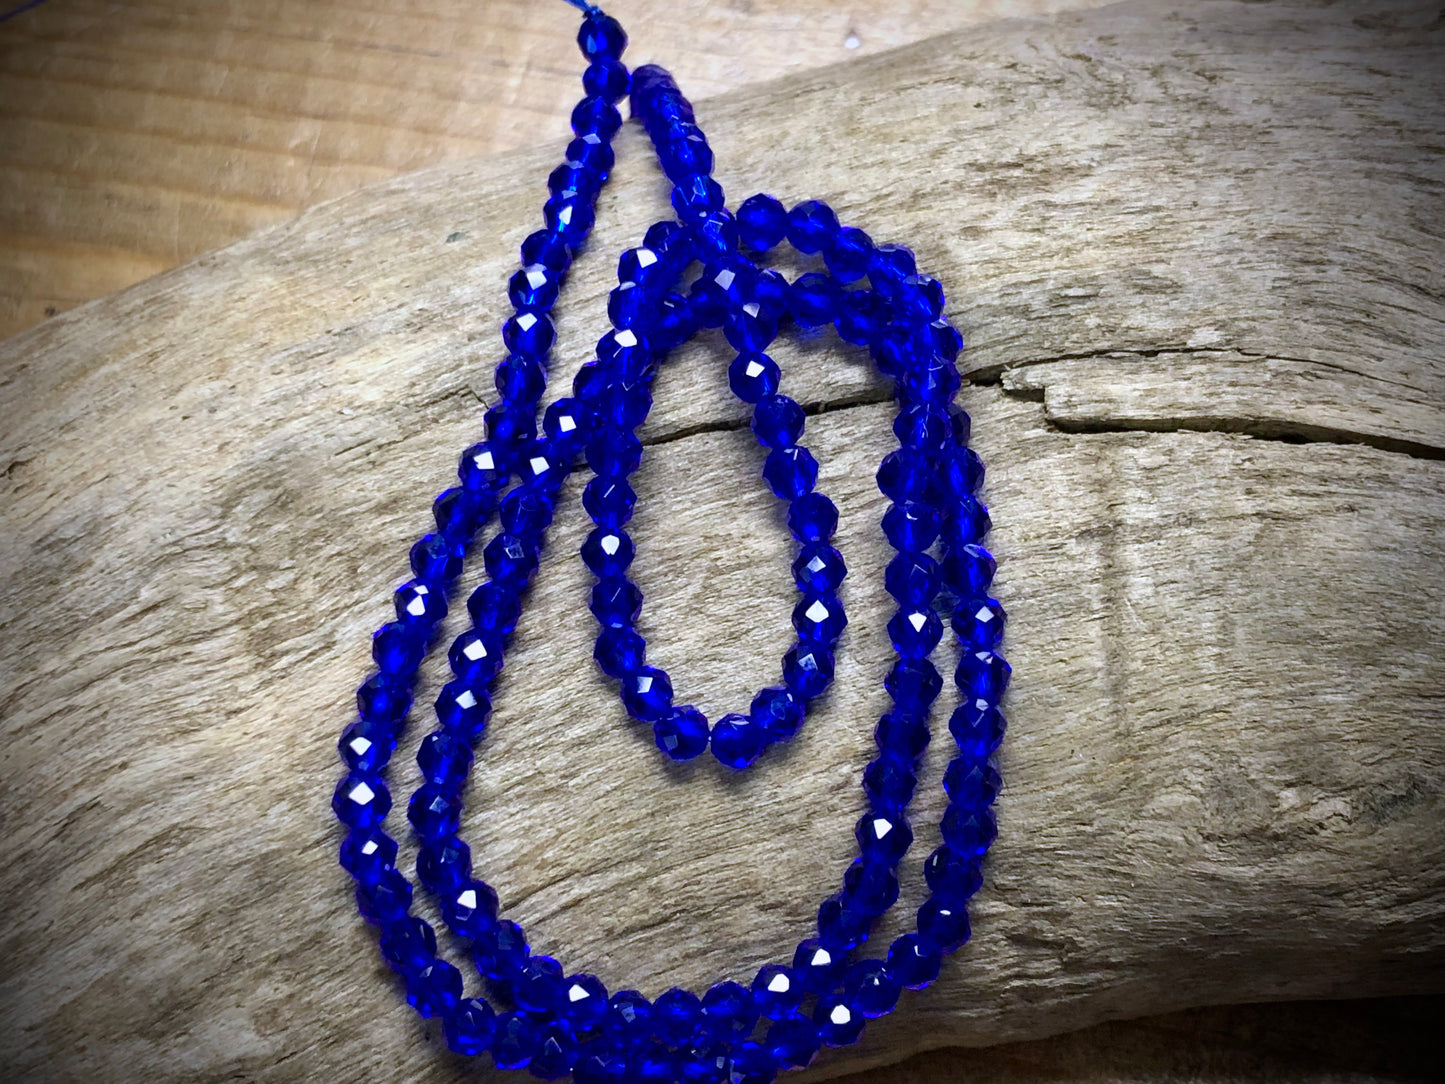 Thunder Polish Glass Faceted Rounds Strand - Royal Blue - 3mm - 14”